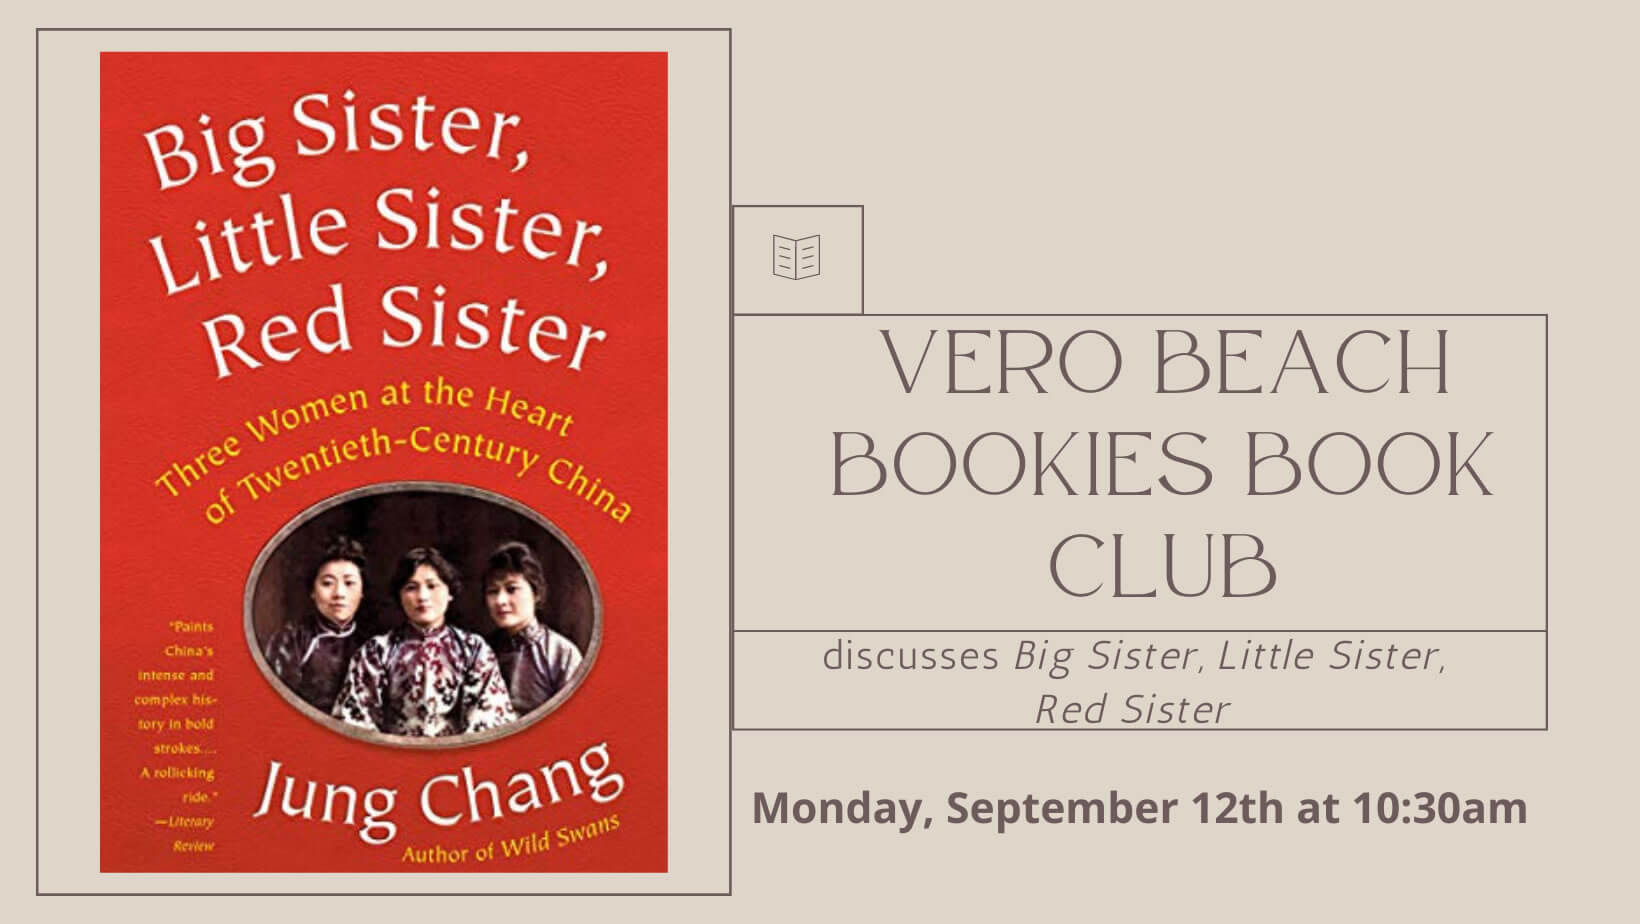 Vero Beach Book Club discusses Big Sister, Little Sister, Red Sister